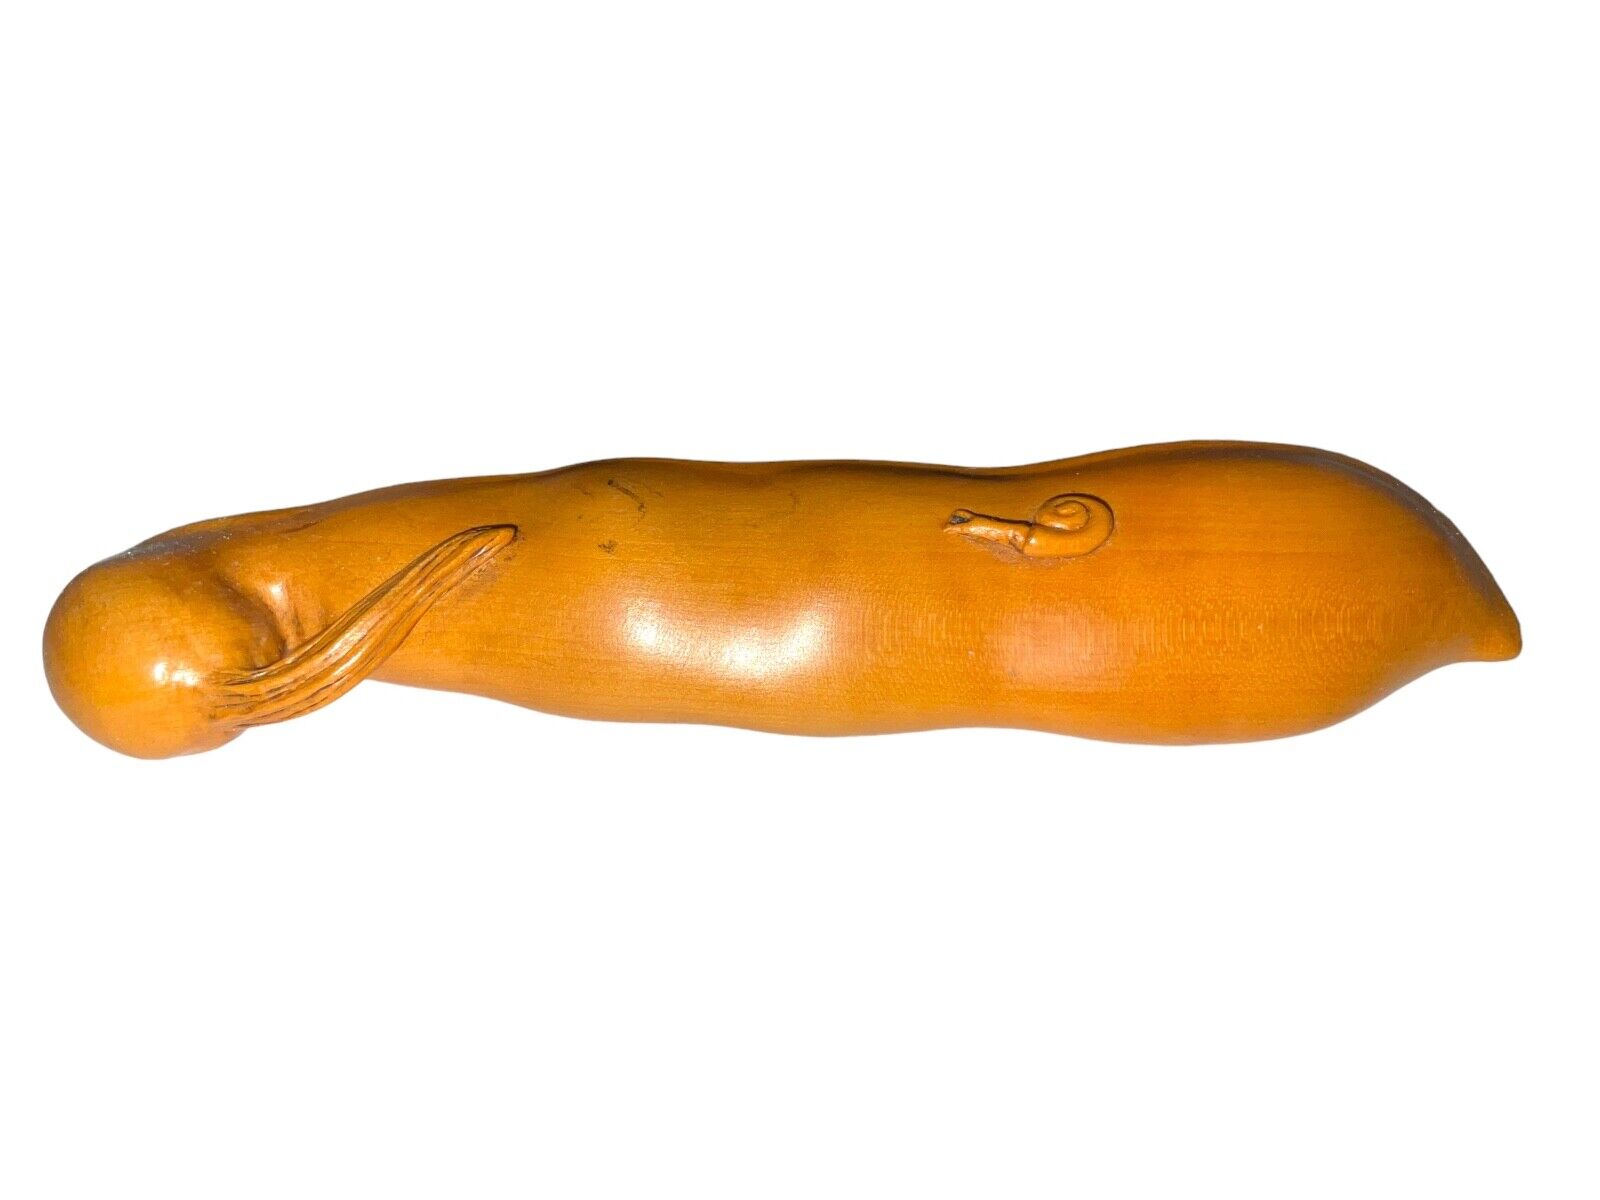 VINTAGE CHINESE WALNUT CARVING - SNAIL EATING GIANT PEAPOD